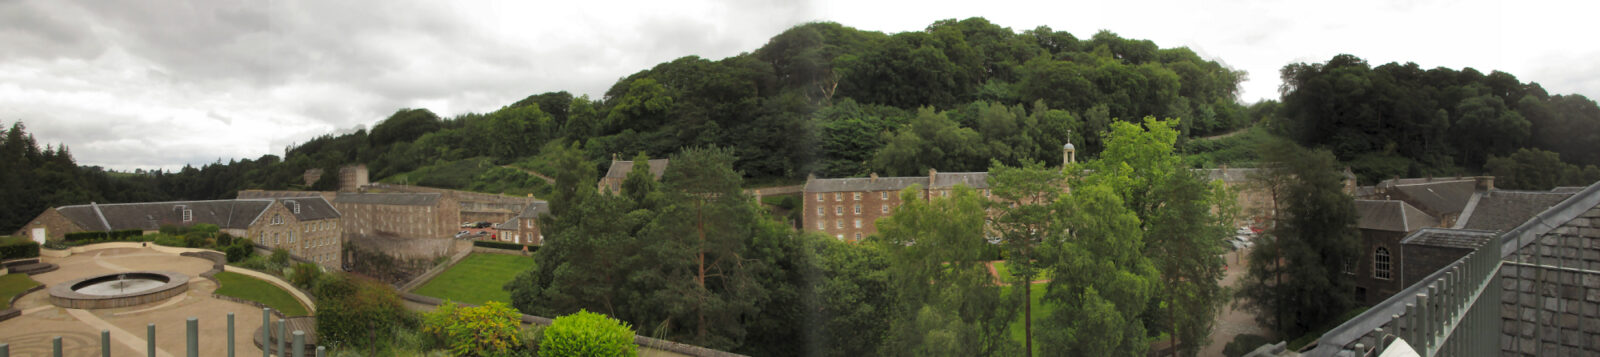 The Company town of New Lanark in Scotland